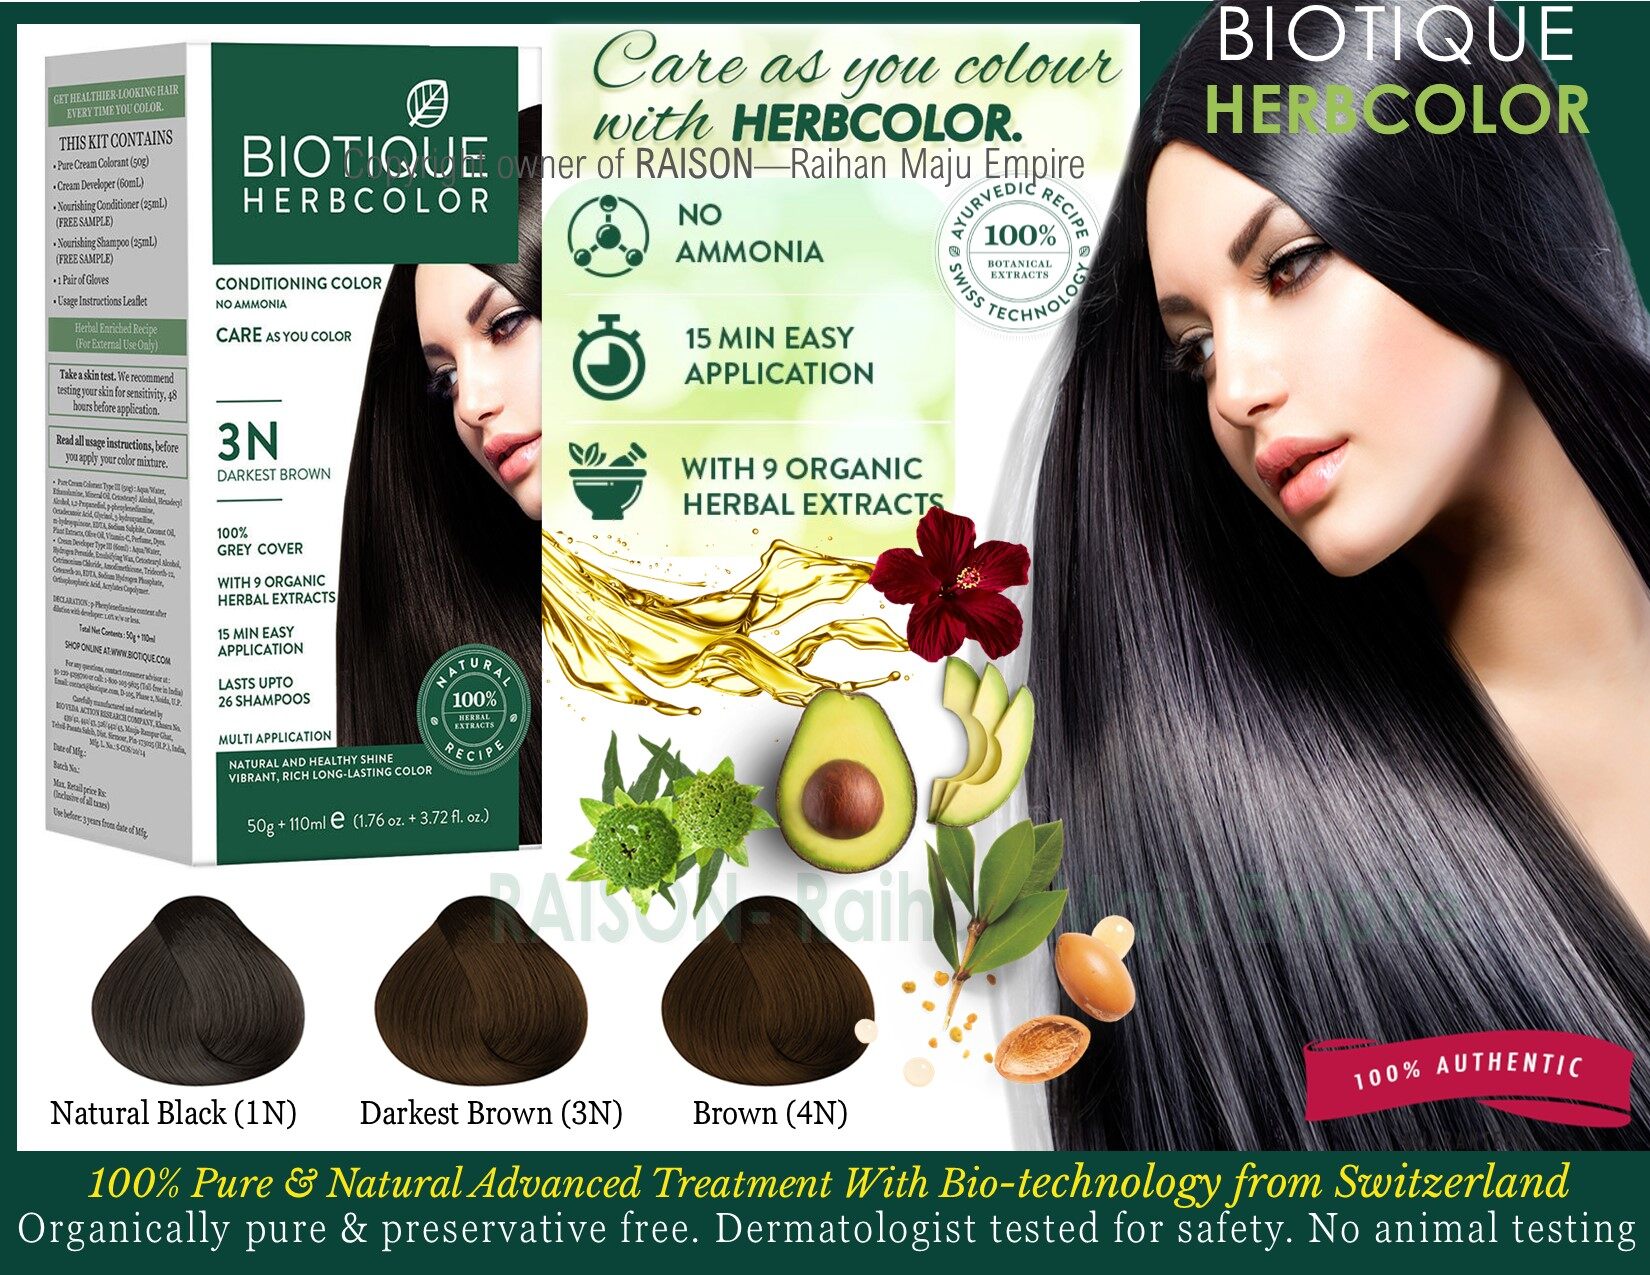 BIOTIQUE ADVANCED AYURVEDA HERBCOLOR CONDITIONING COLOUR NATURAL AND  HEALTHY SHINE VIBRANT, RICH LONG-LASTING PERMANENT HAIR COLOR 50gm+110ml  (Natural Black (1N) Darkest Brown (3N) Brown (4N) | Lazada